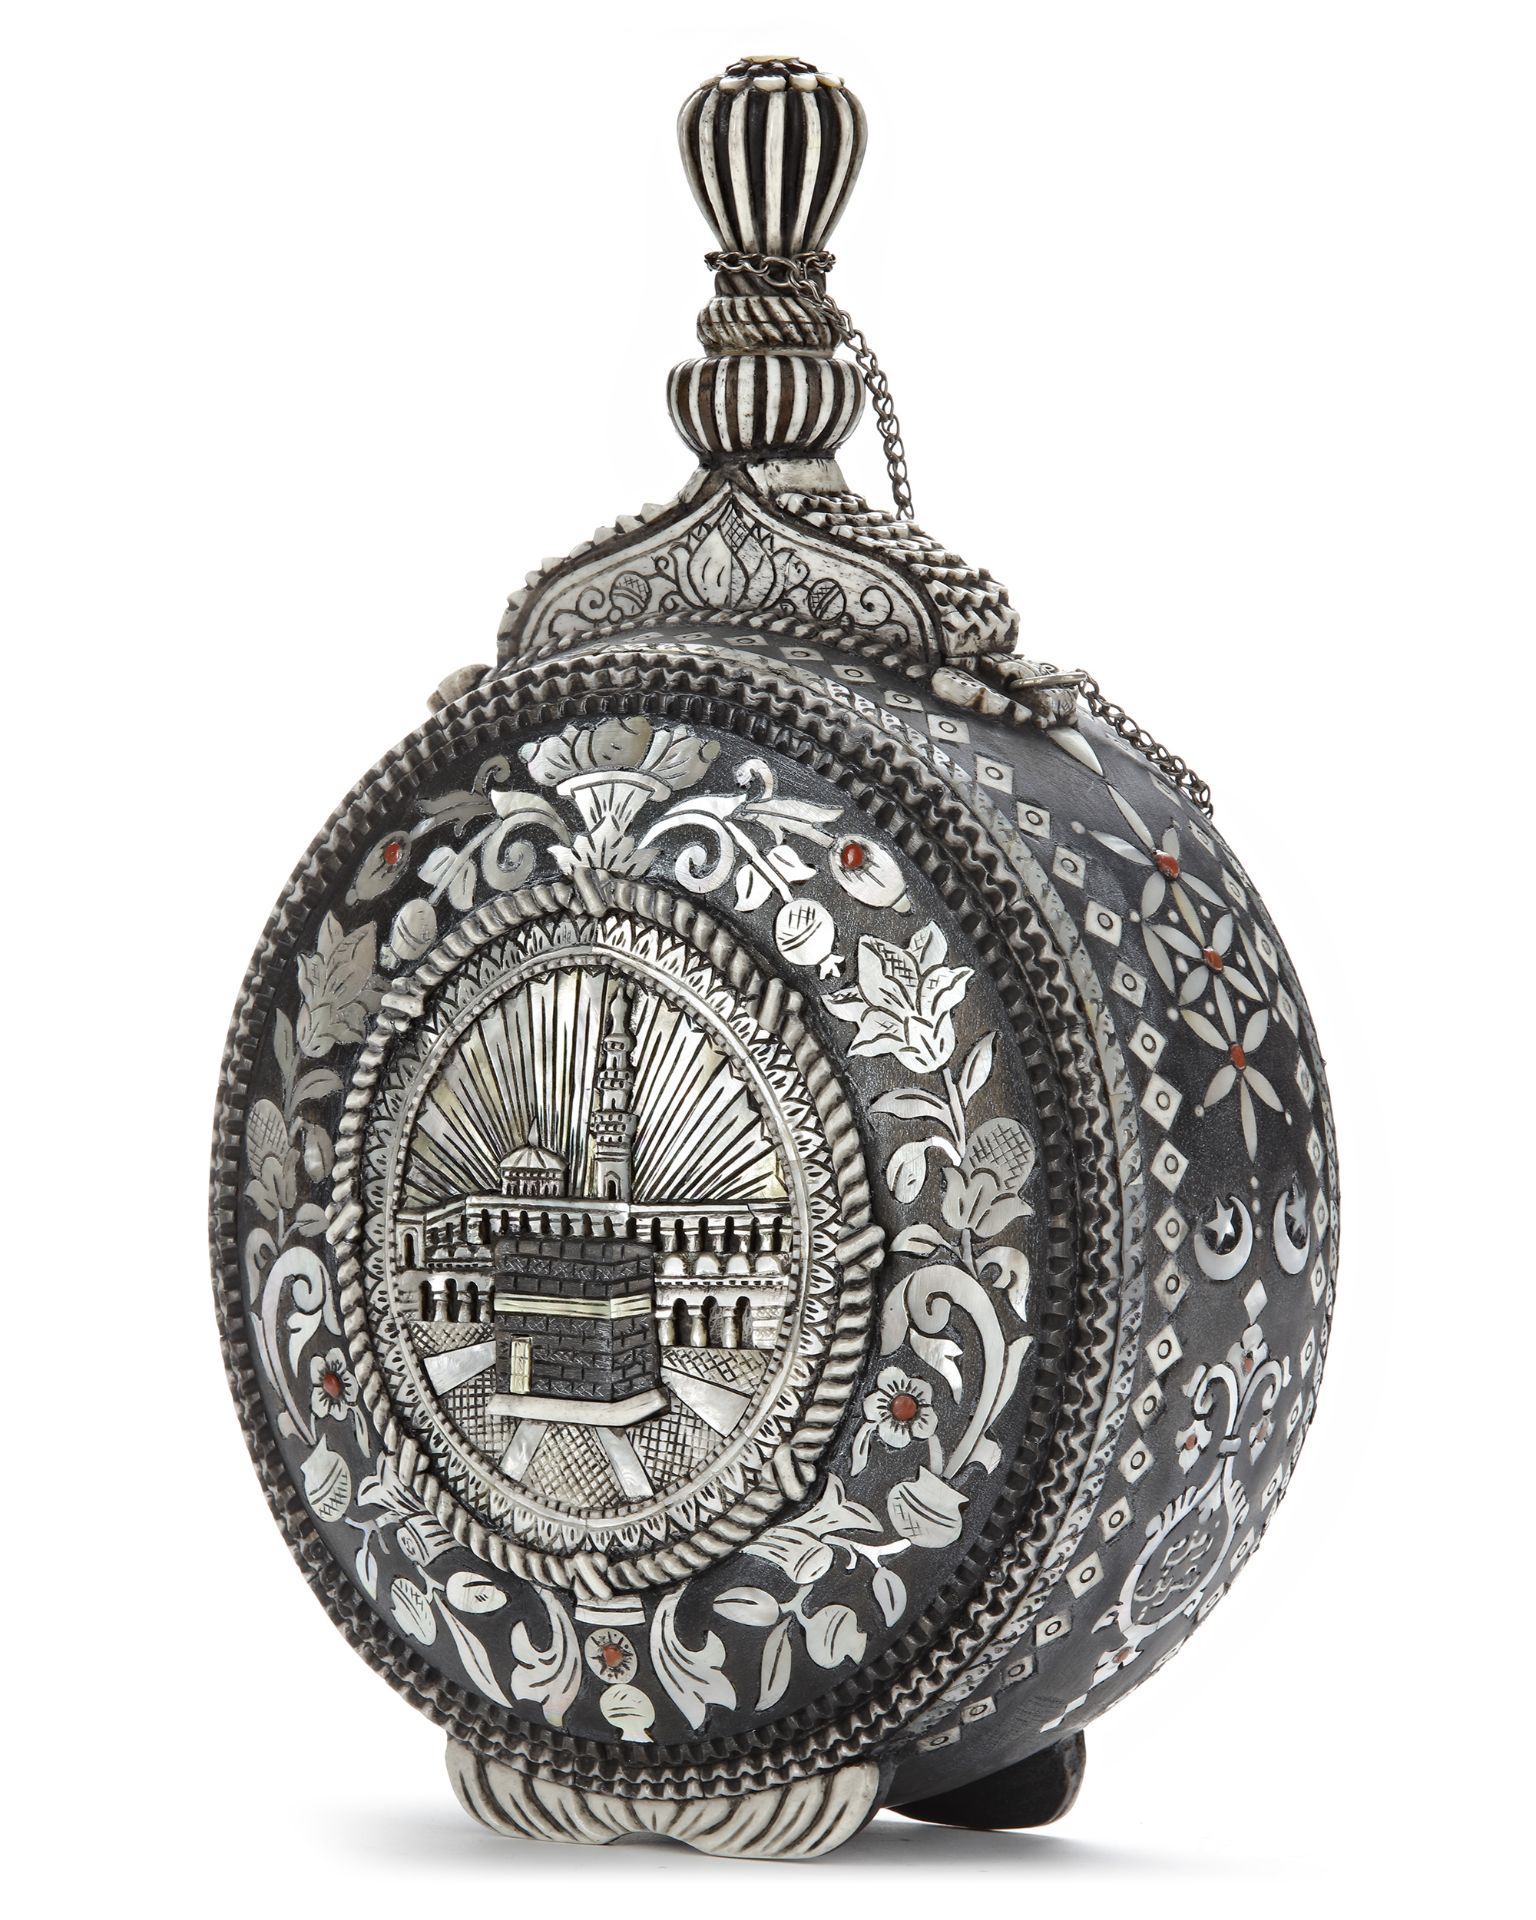 AN OTTOMAN MOTHER-OF-PEARL WOODEN MOON FLASK, EARLY 20TH CENTURY - Image 2 of 4